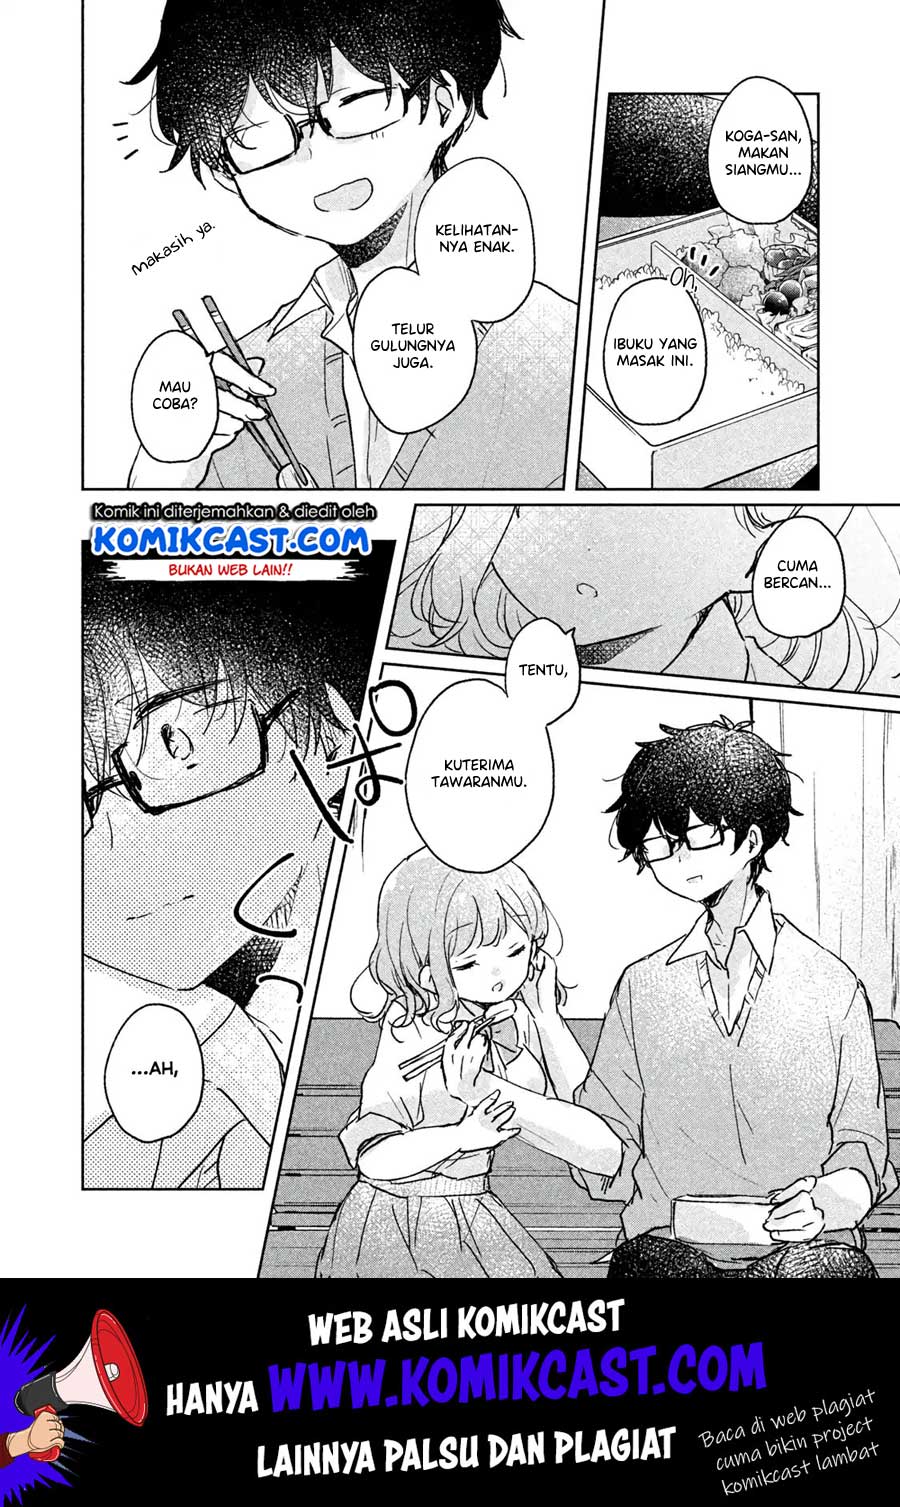 It’s Not Meguro-san’s First Time Chapter 7